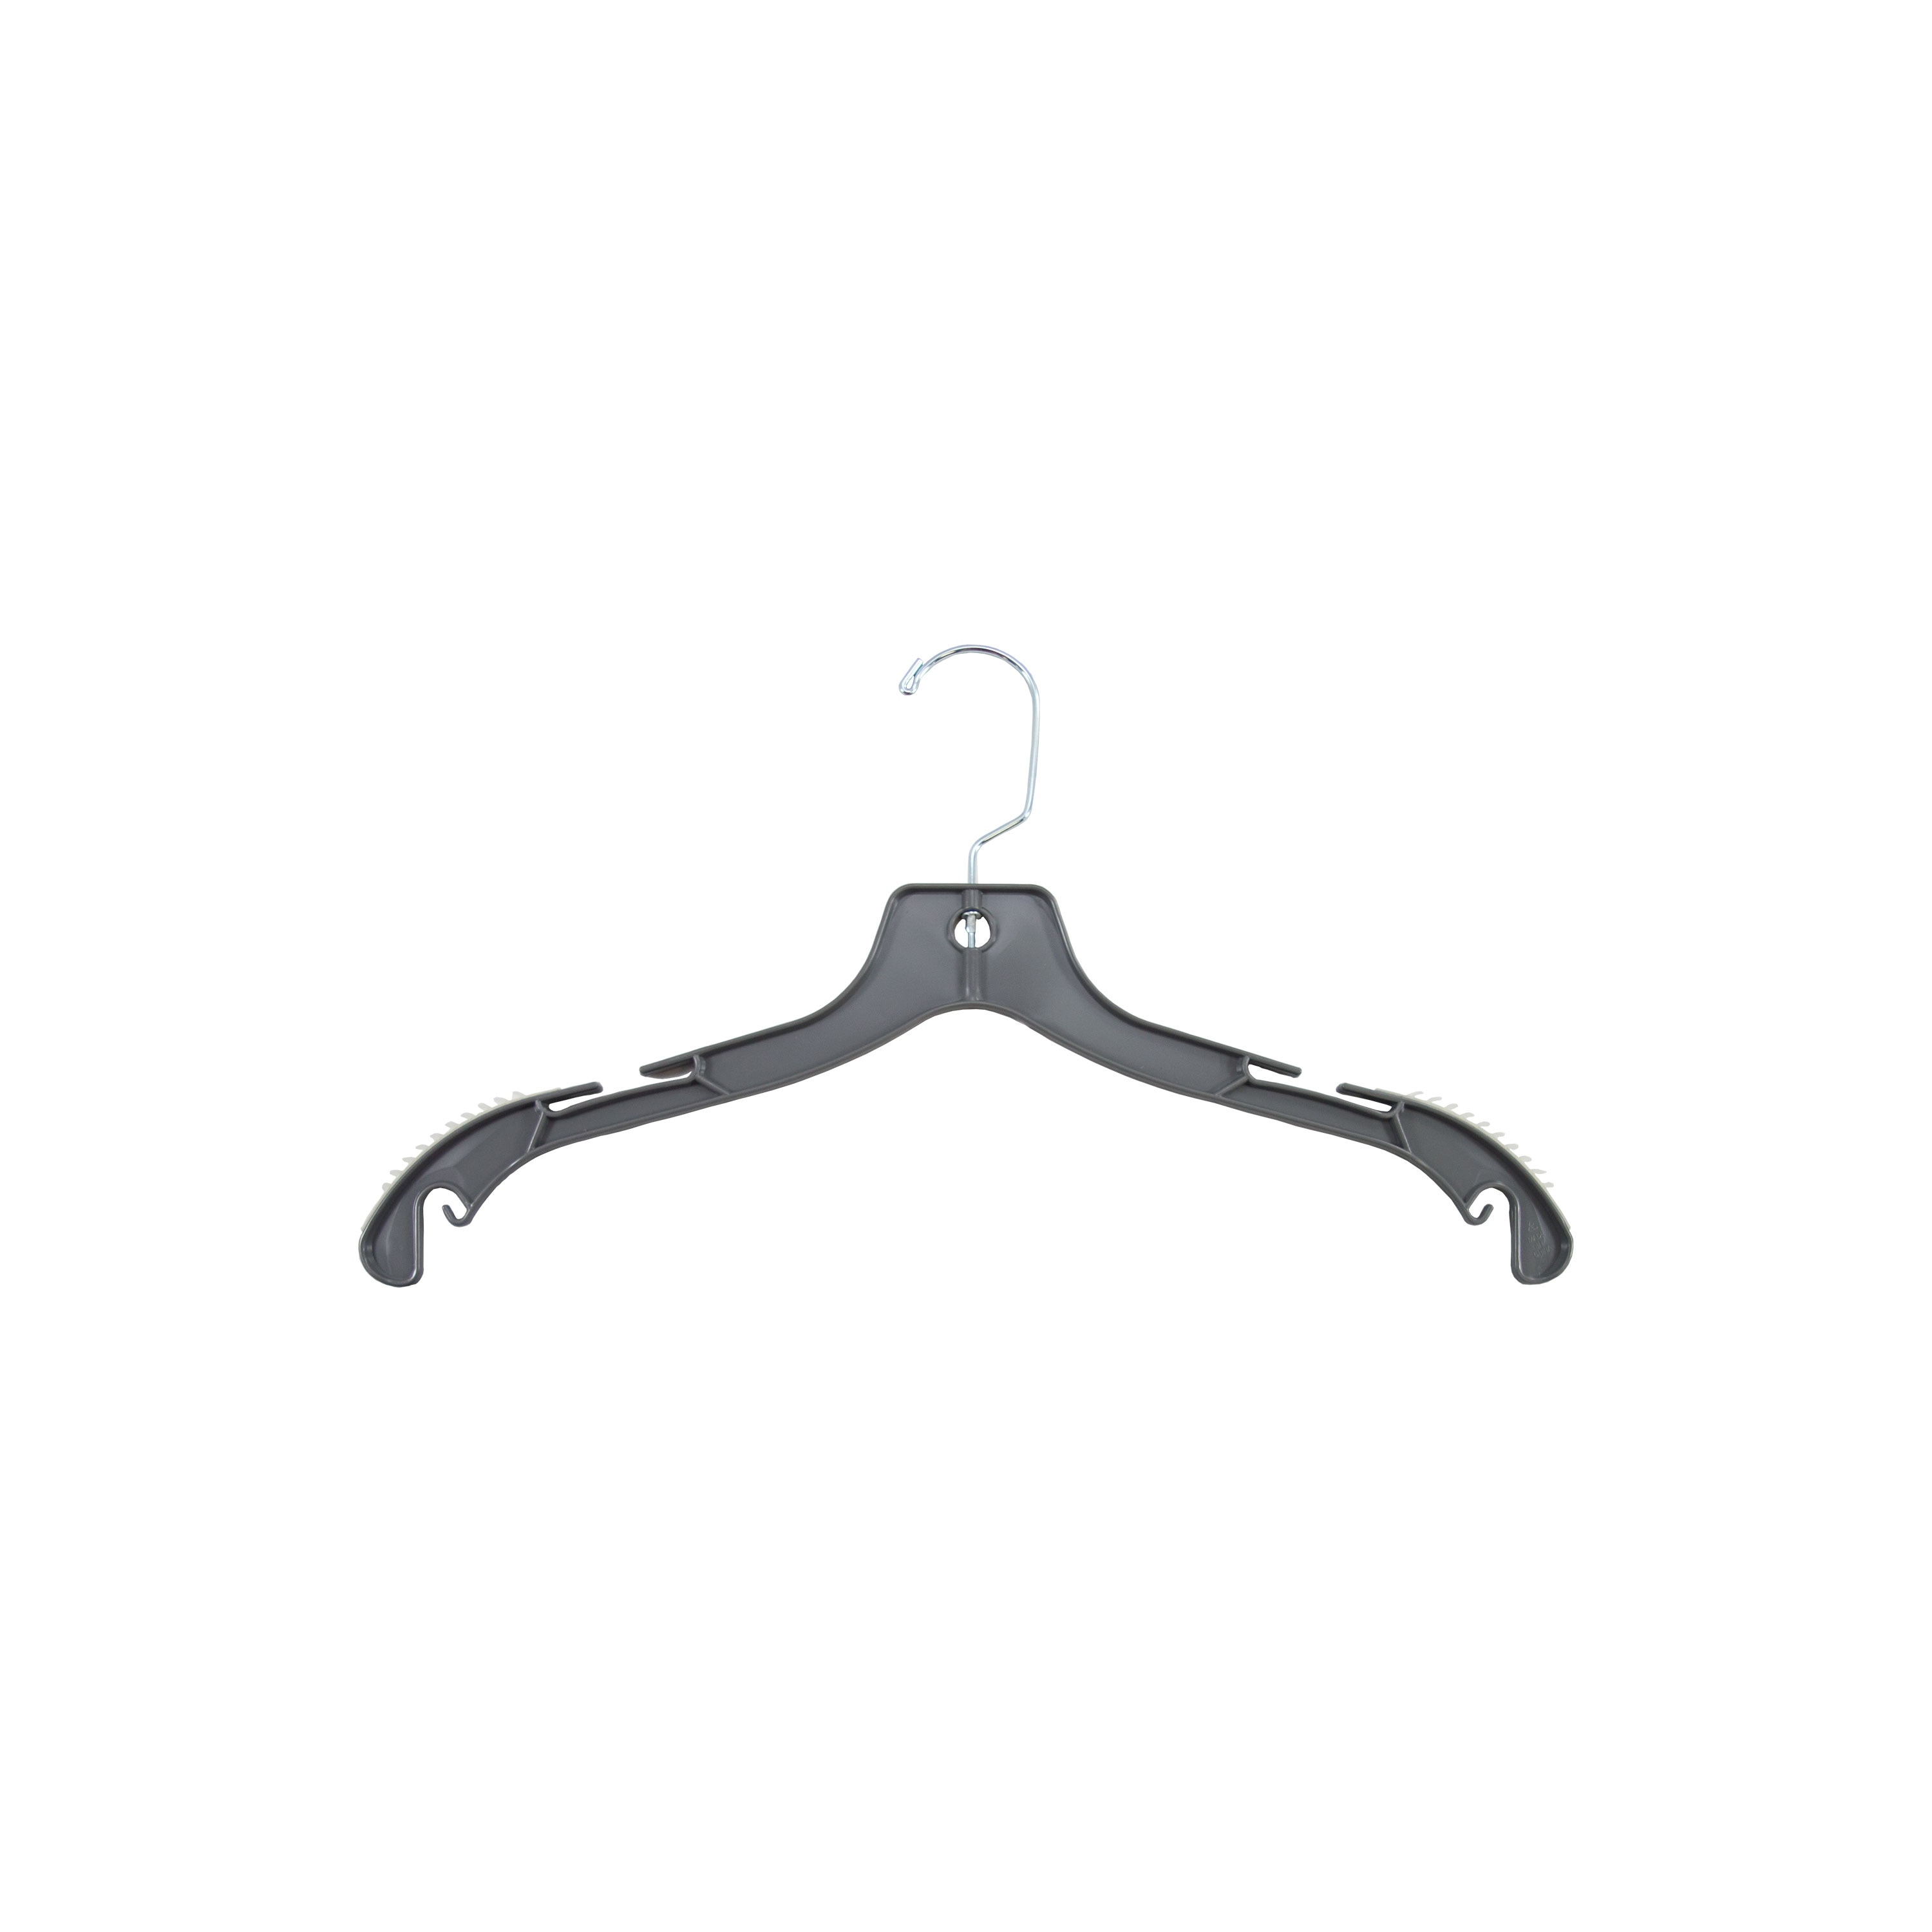 https://ak1.ostkcdn.com/images/products/is/images/direct/2b36082a0d7e65b1480ba2caad4d13e3ebc08e95/Grey-Plastic-Top-Hanger-W--Non-Slip-Rubber-Shoulder-Strips-%26-Notches%2C-17%22-Length-X-3-8%22-Thick%2C-Chrome-Hook-Box-of-100.jpg